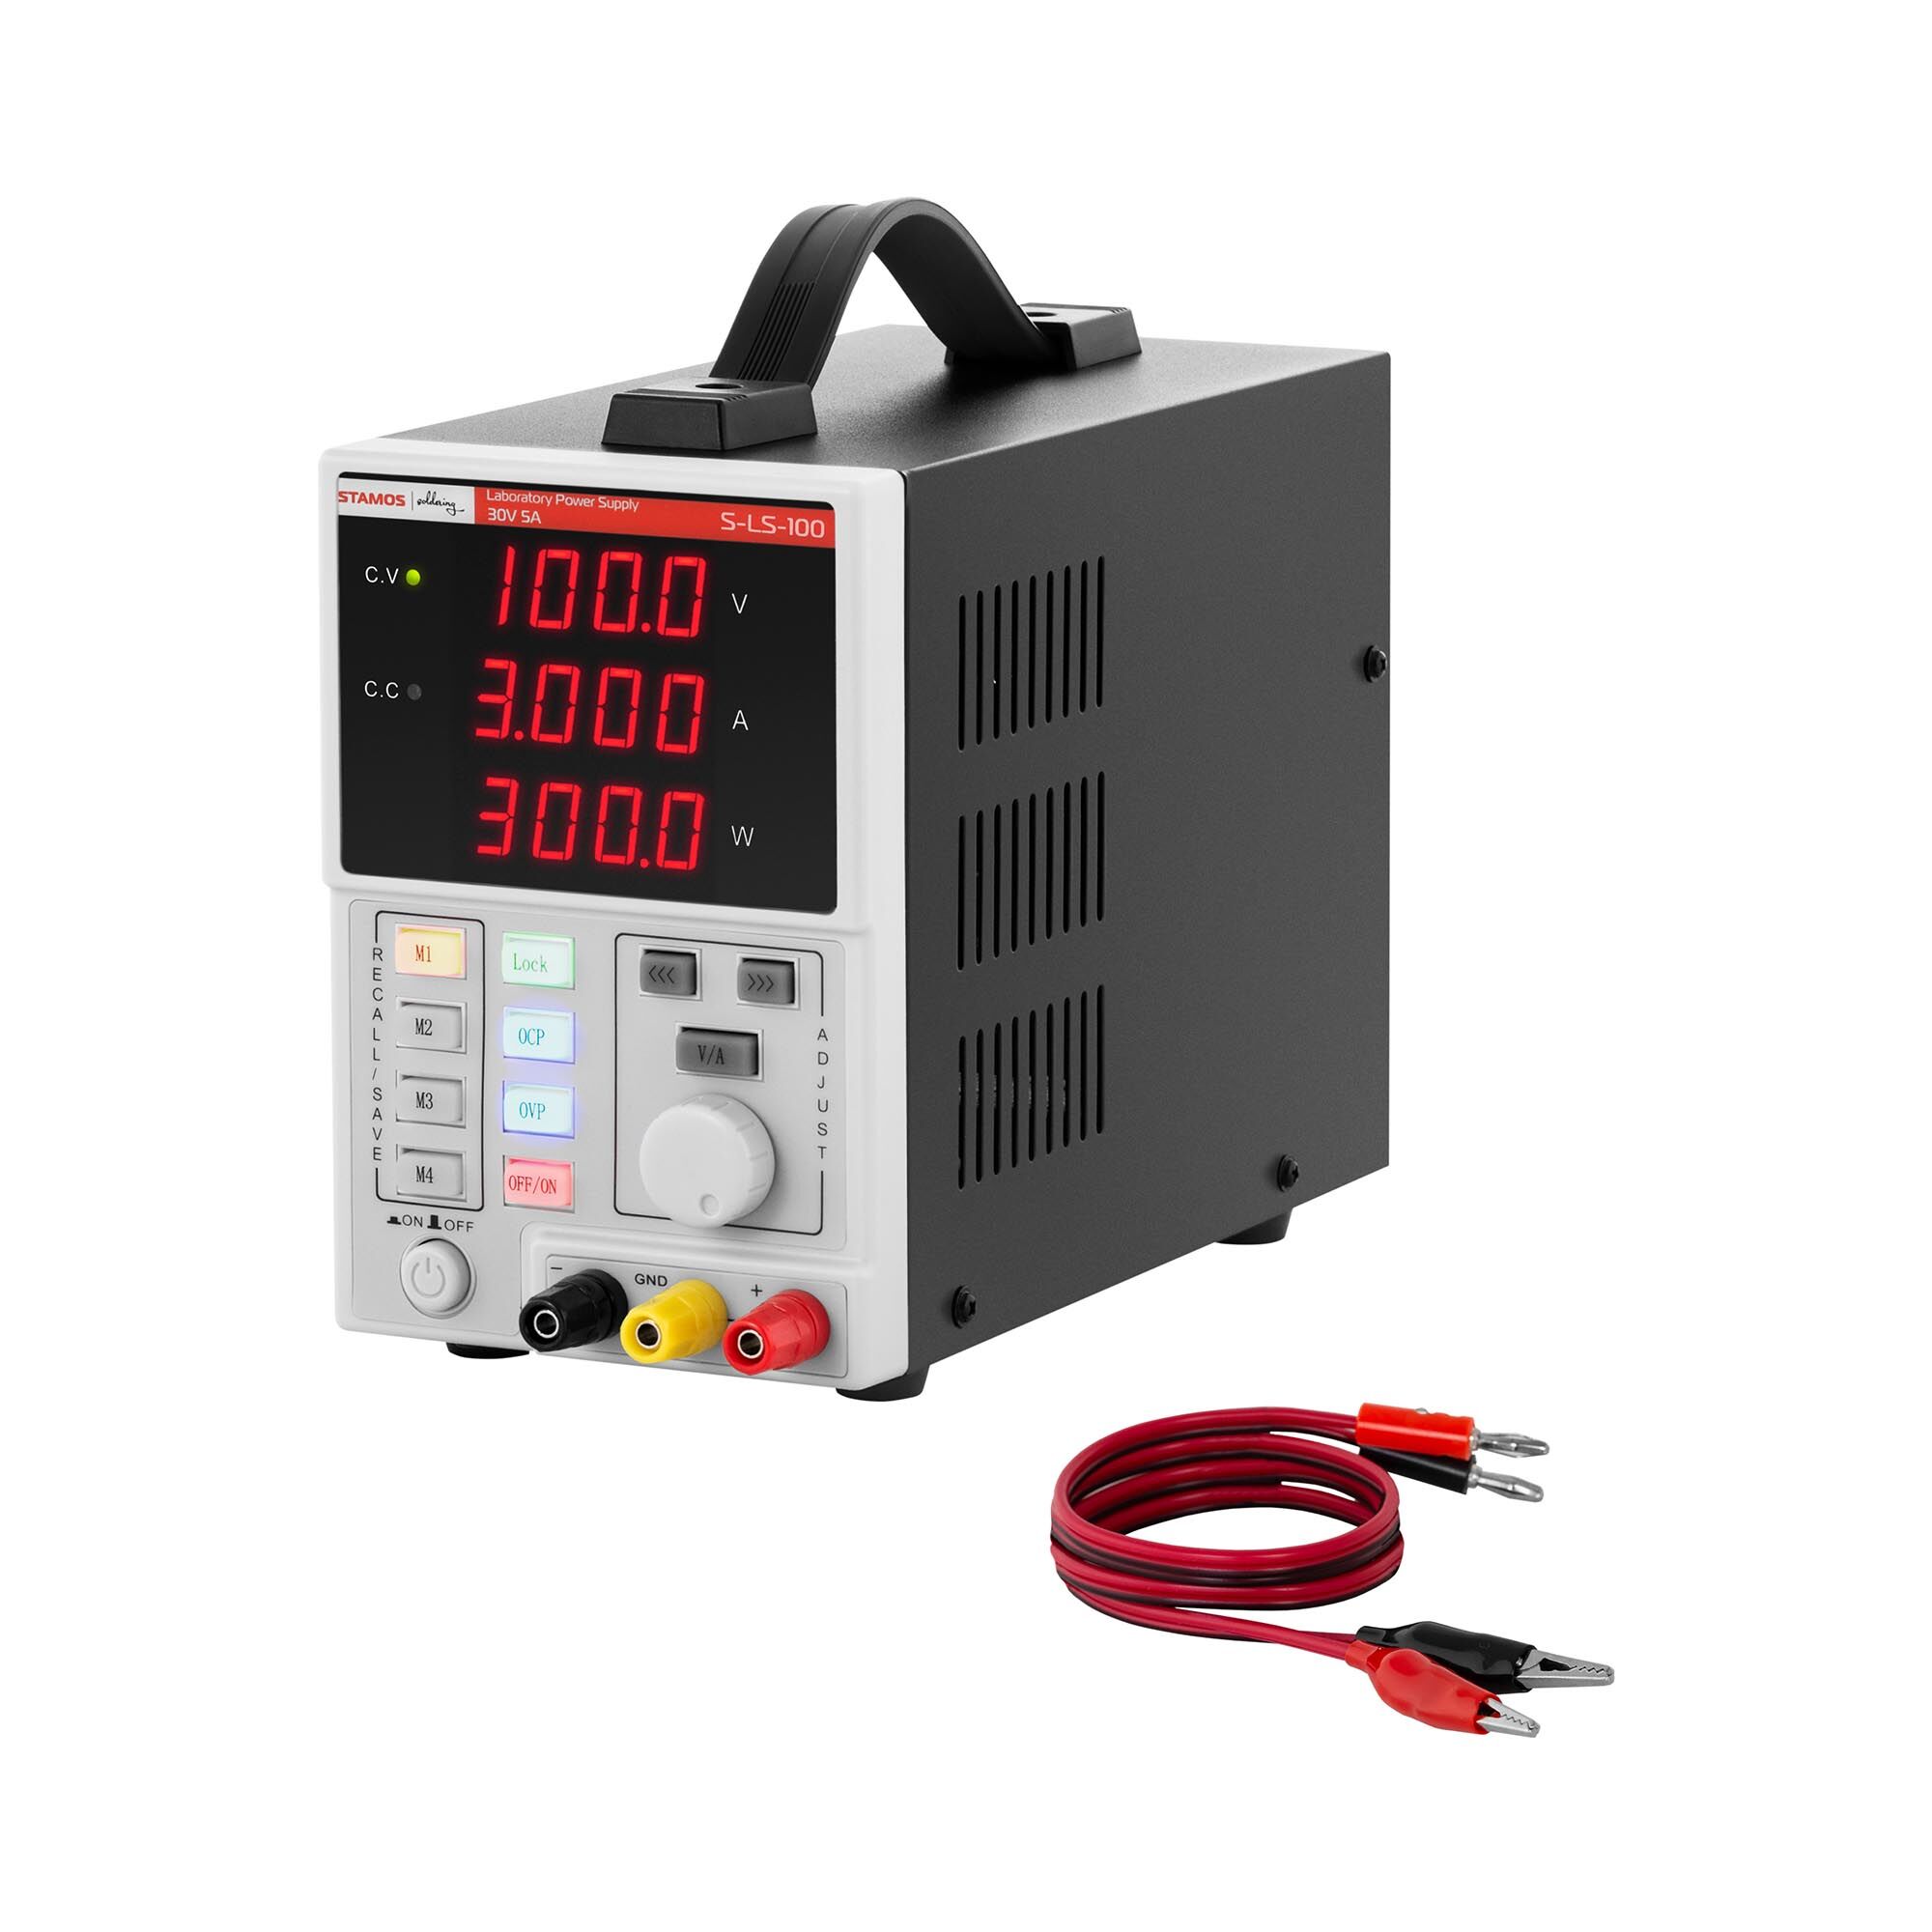 Stamos Soldering Bench Power Supply - 0 - 100 V - 0 - 3 A DC - 300 W - 4-digit LED display